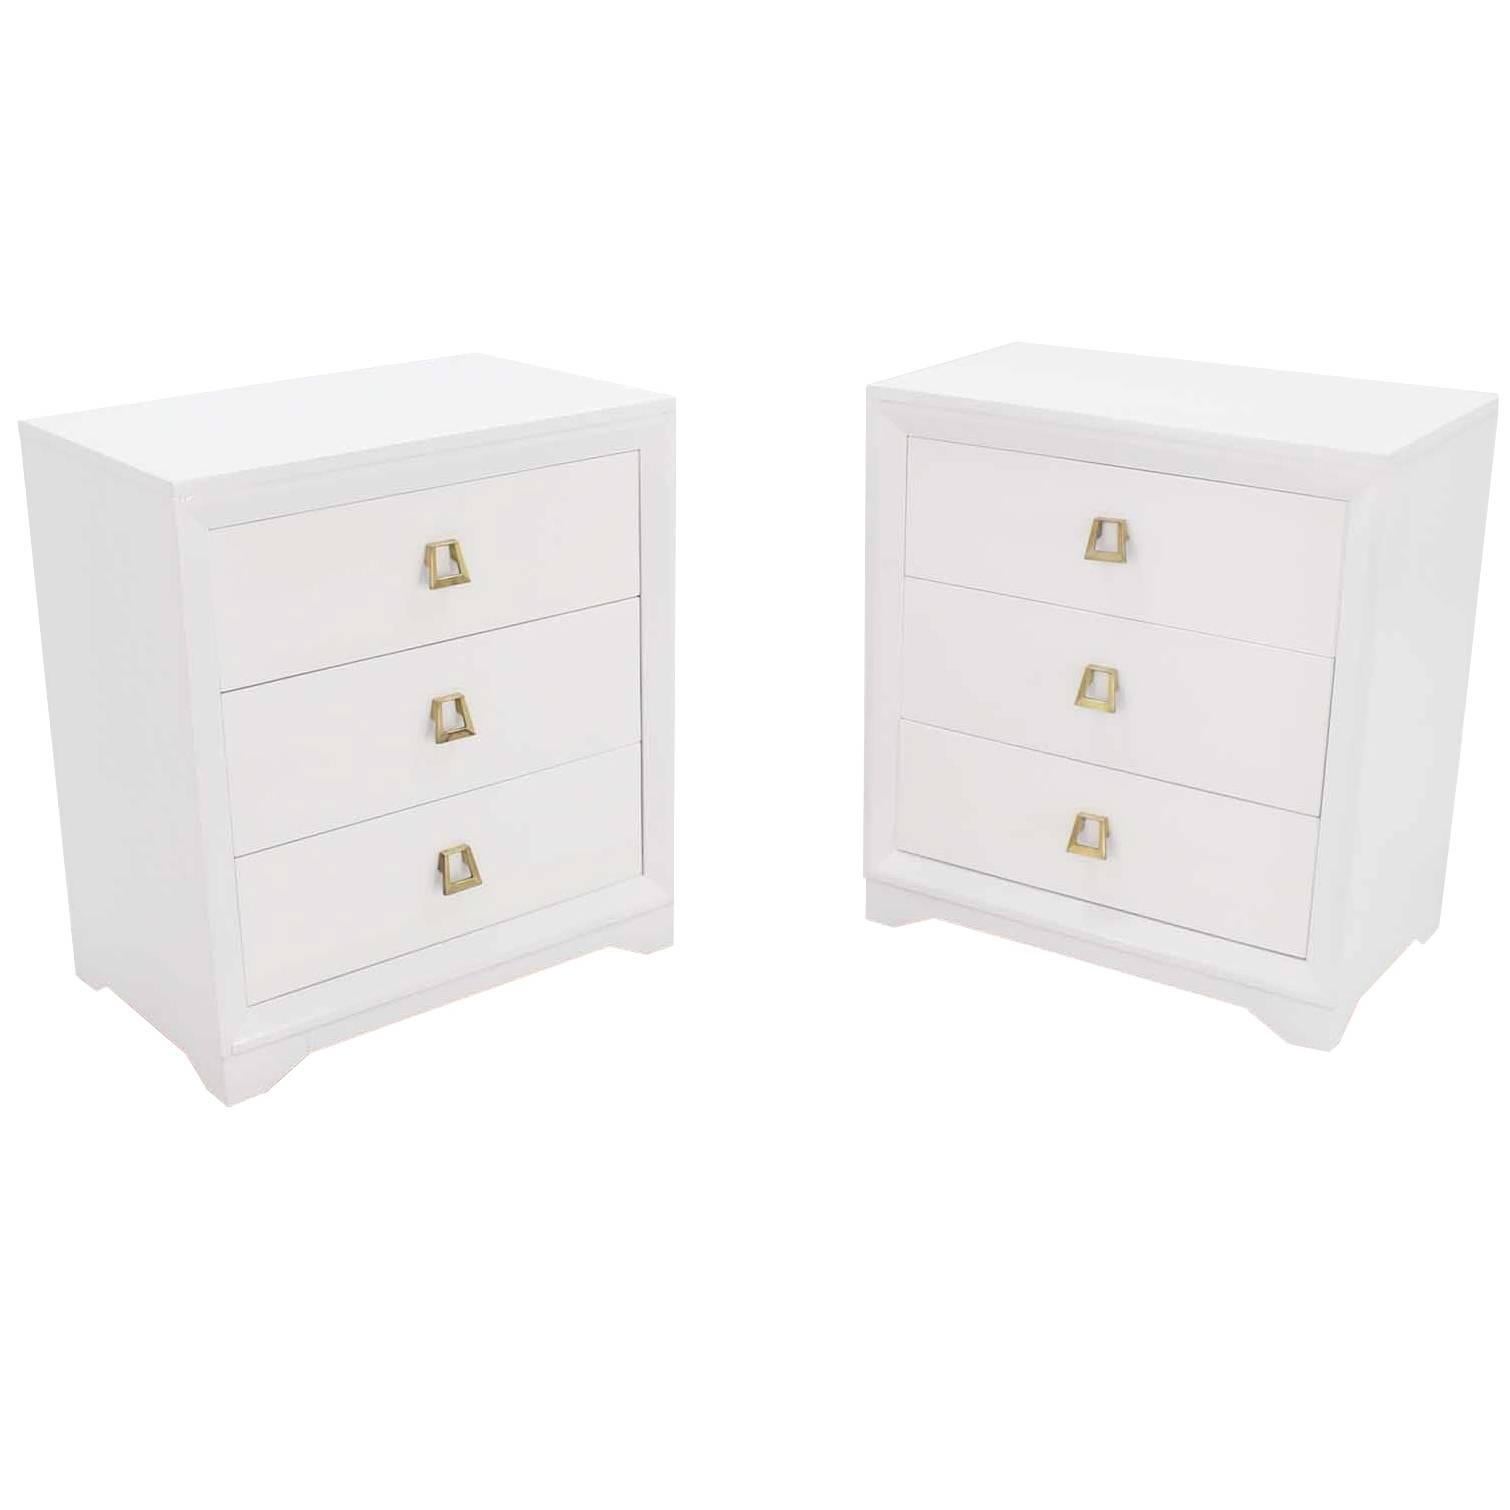 Pair of White Lacquer Three-Drawer Bachelor Chests